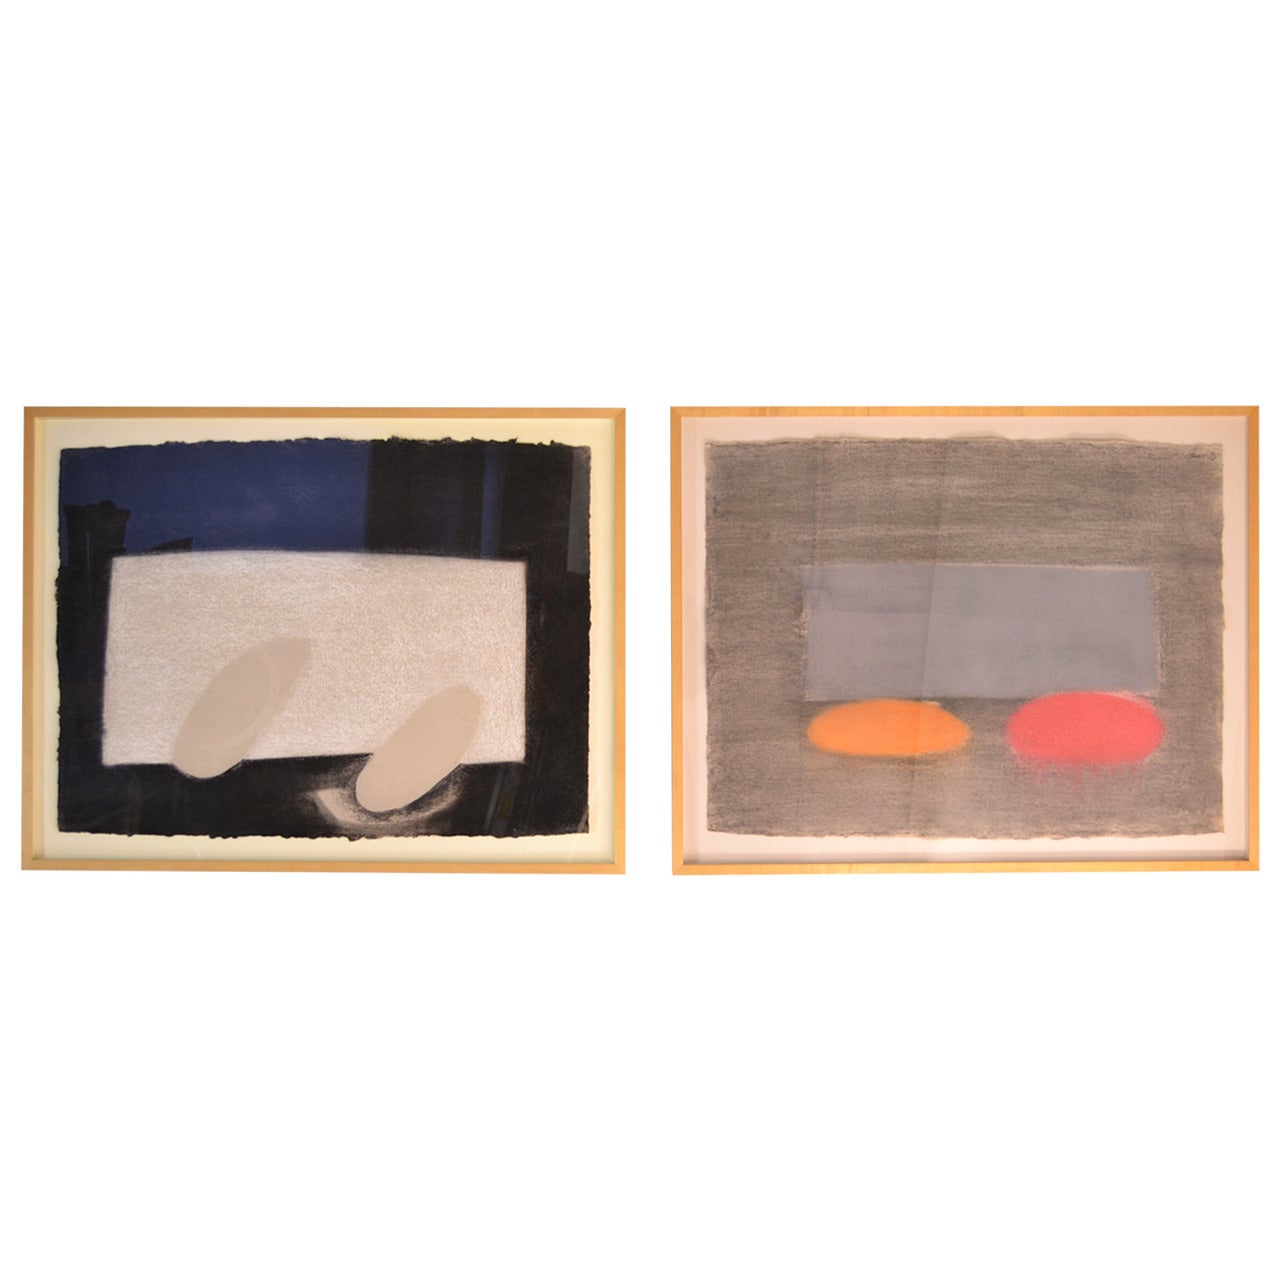 Michael Steiner, Signed Works on Paper Paintings, USA circa 1989